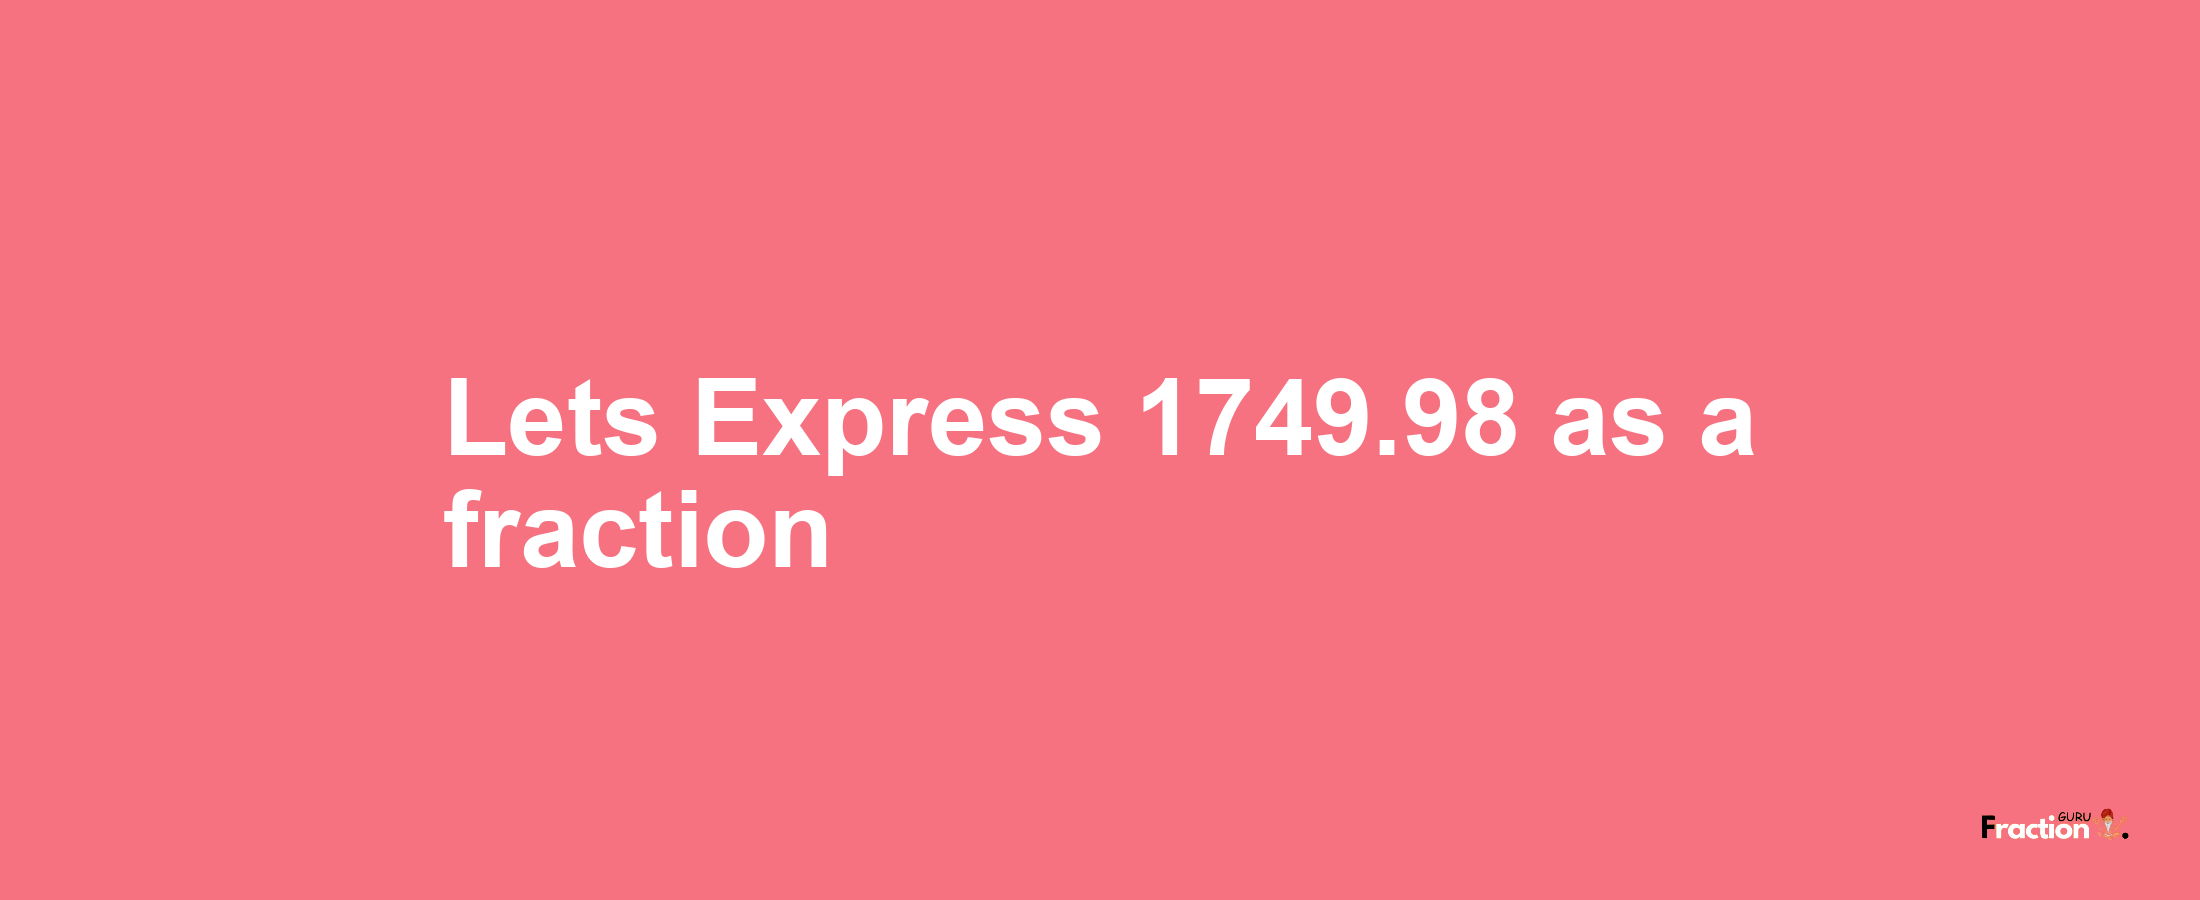 Lets Express 1749.98 as afraction